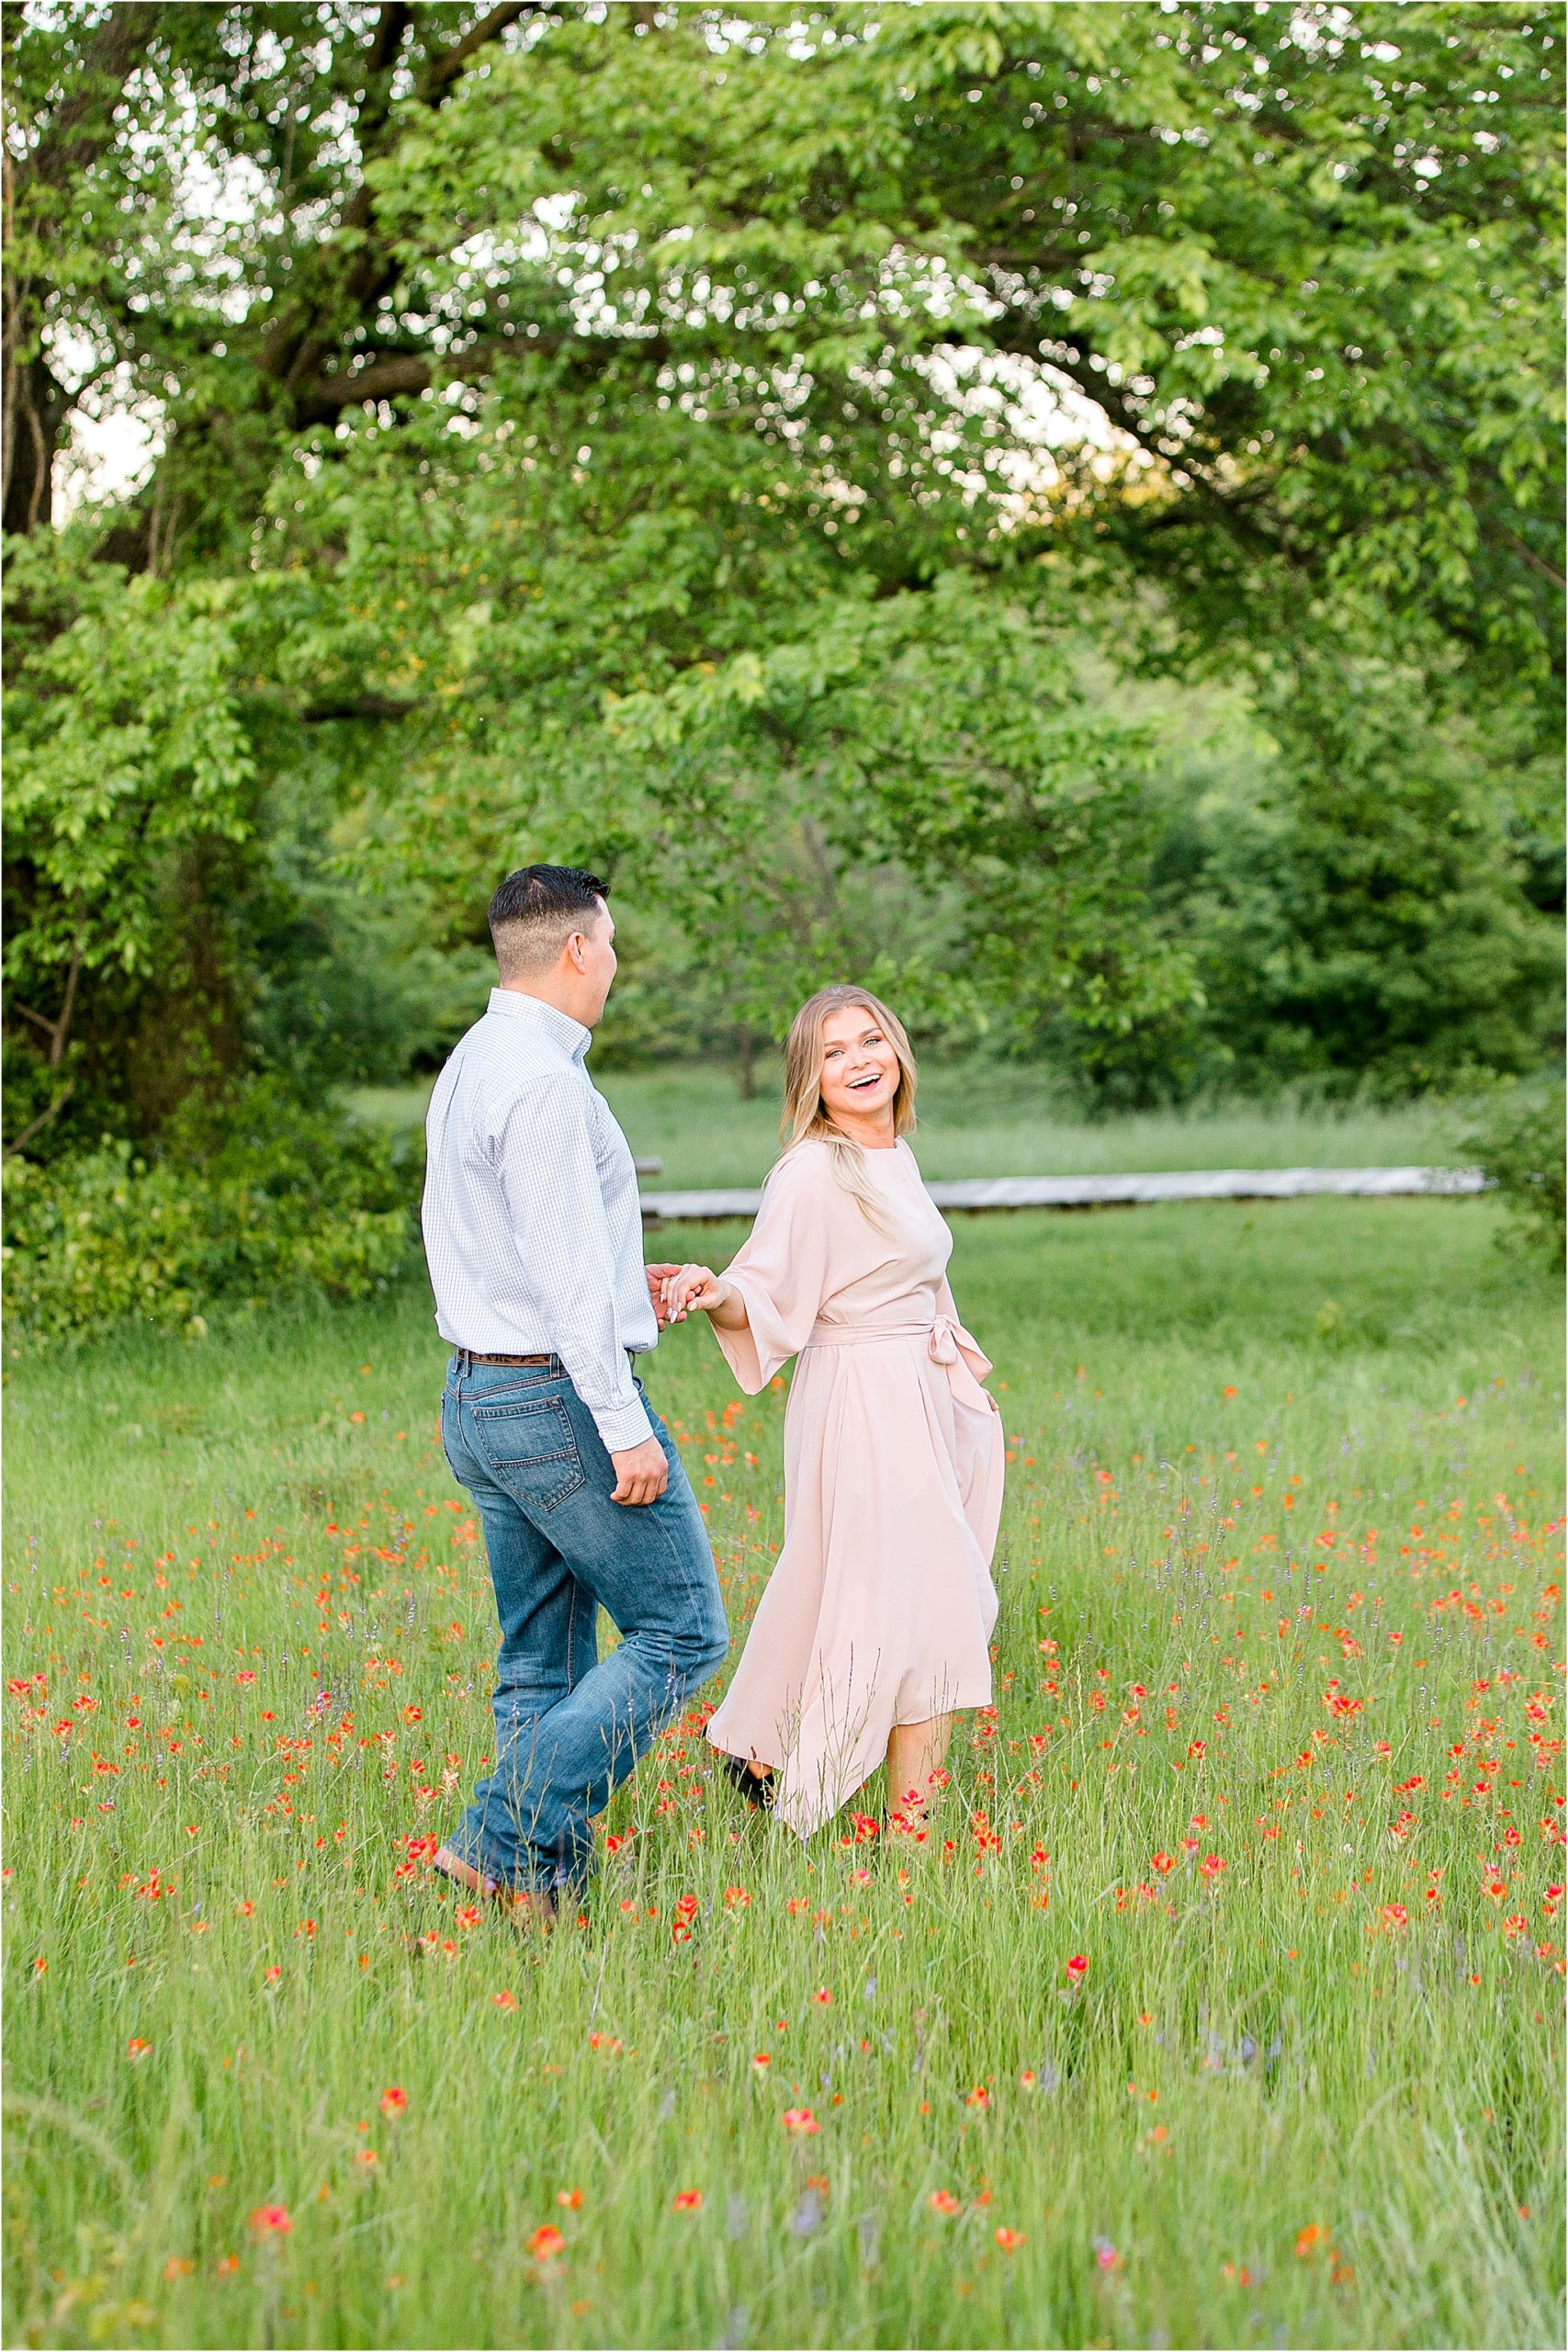 A happy, smiling bride to be pulling her fiance along in a lush field with flowers for their engagement session near Fort Worth, Texas 